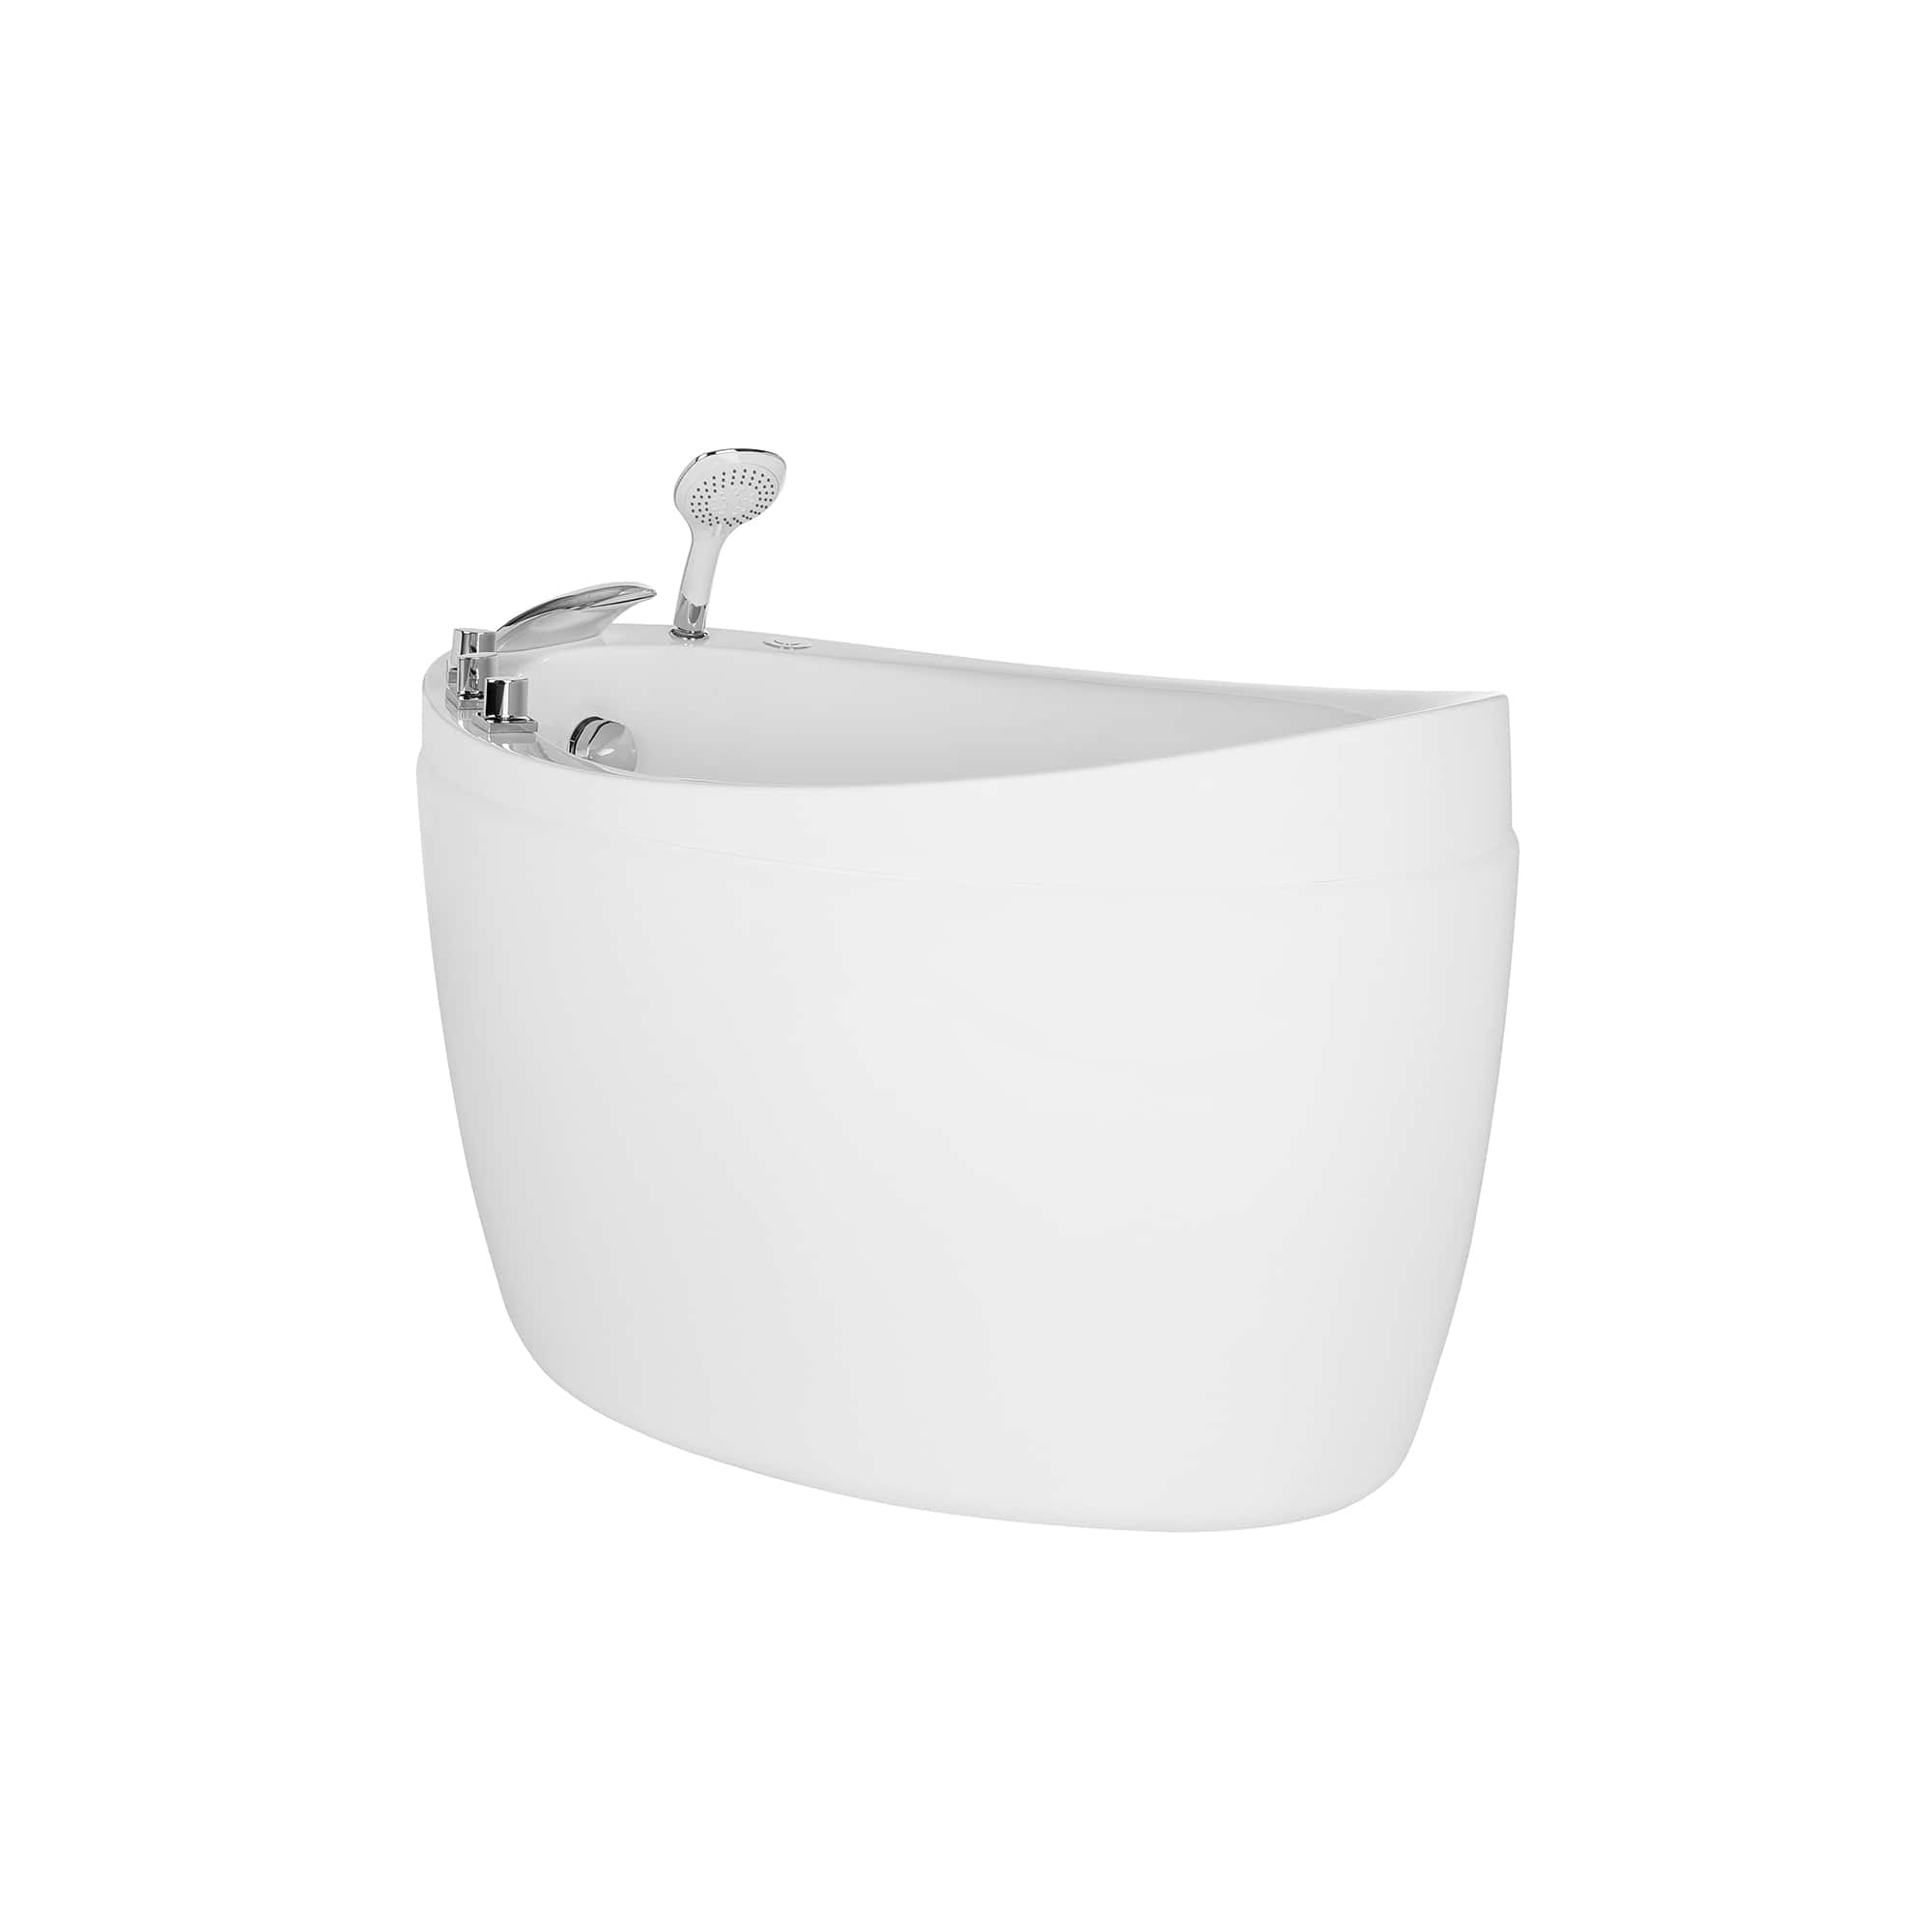 Empava | 48JT011 48 in. Japanese-Style Freestanding Oval Air Massage Tub